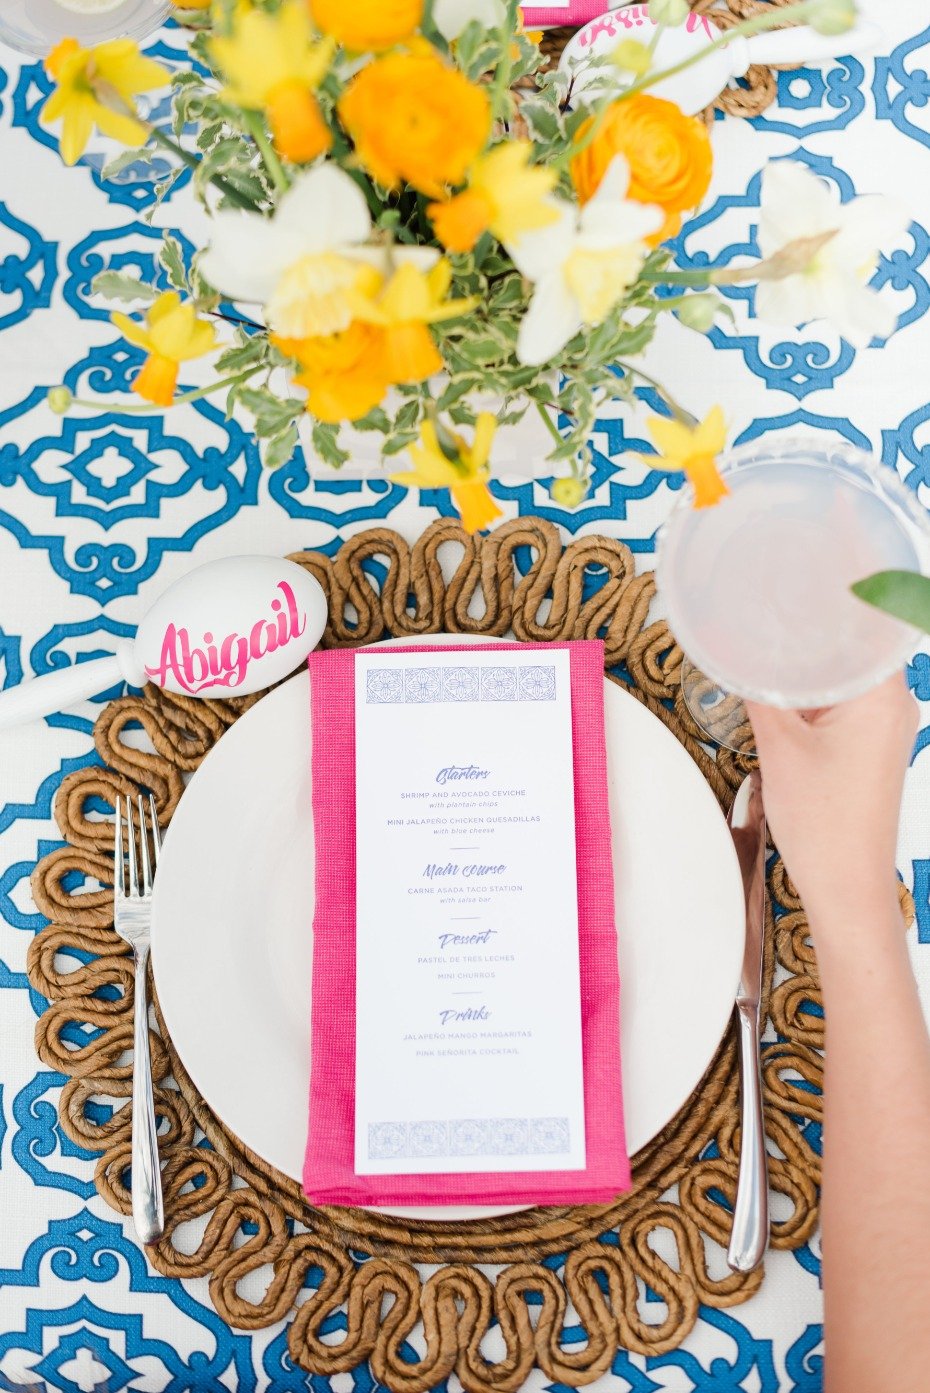 bright and exciting fiesta themed table setting